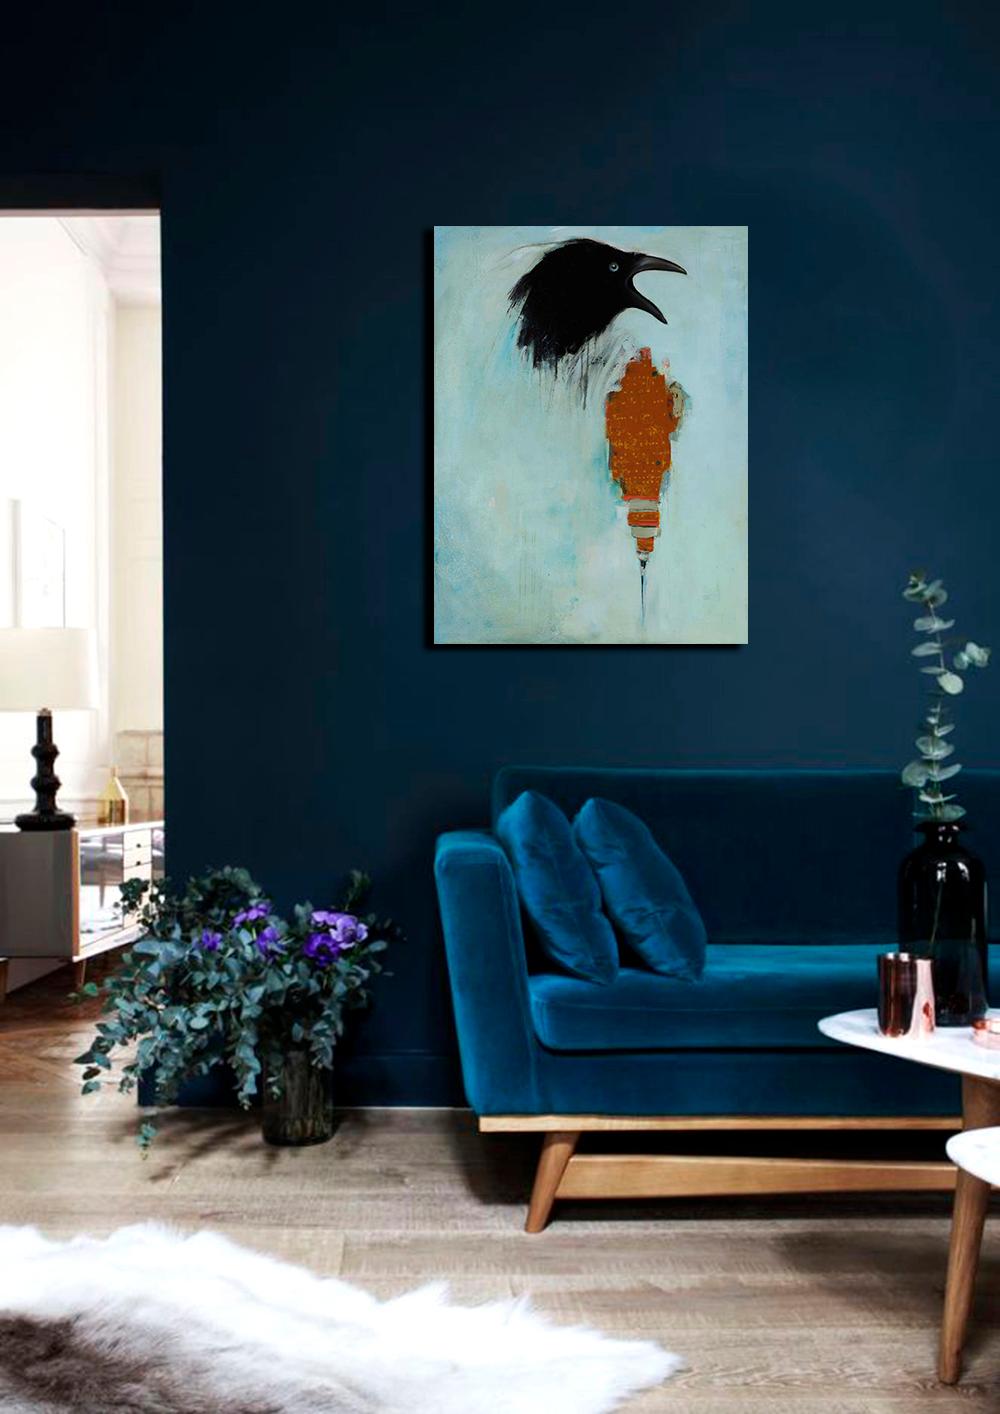 Go Dolphin Home, animal abstract painting, oil on canvas, blue with black bird - Painting by Michele Mikesell